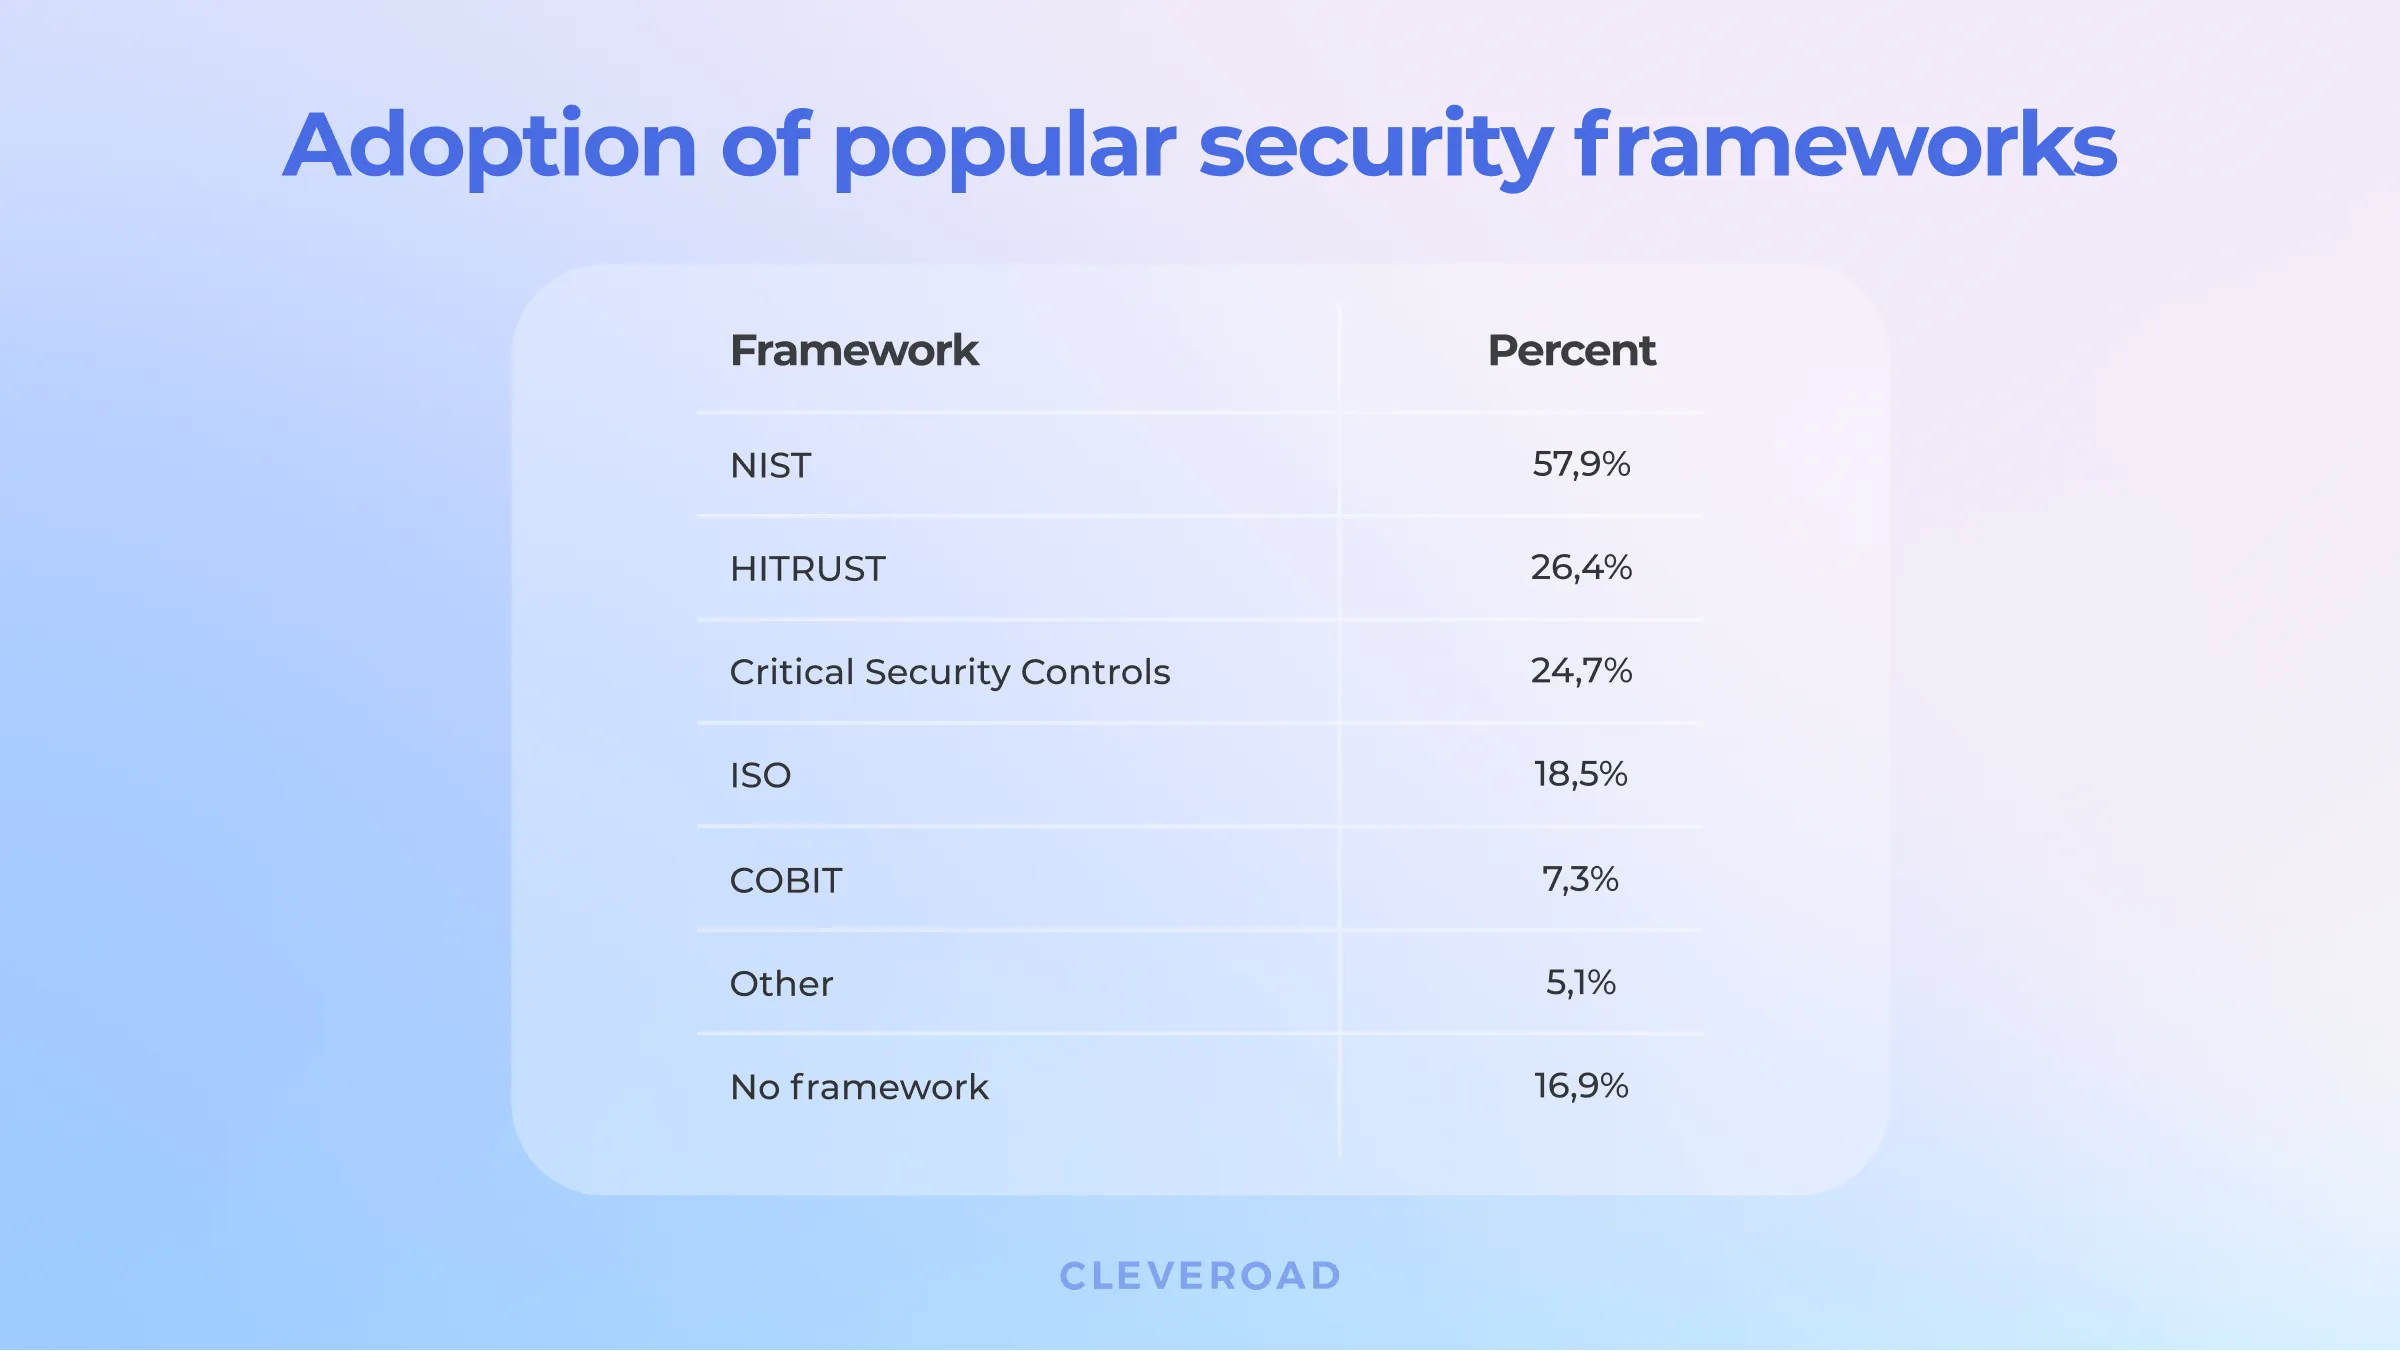 The most common cybersecurity frameworks